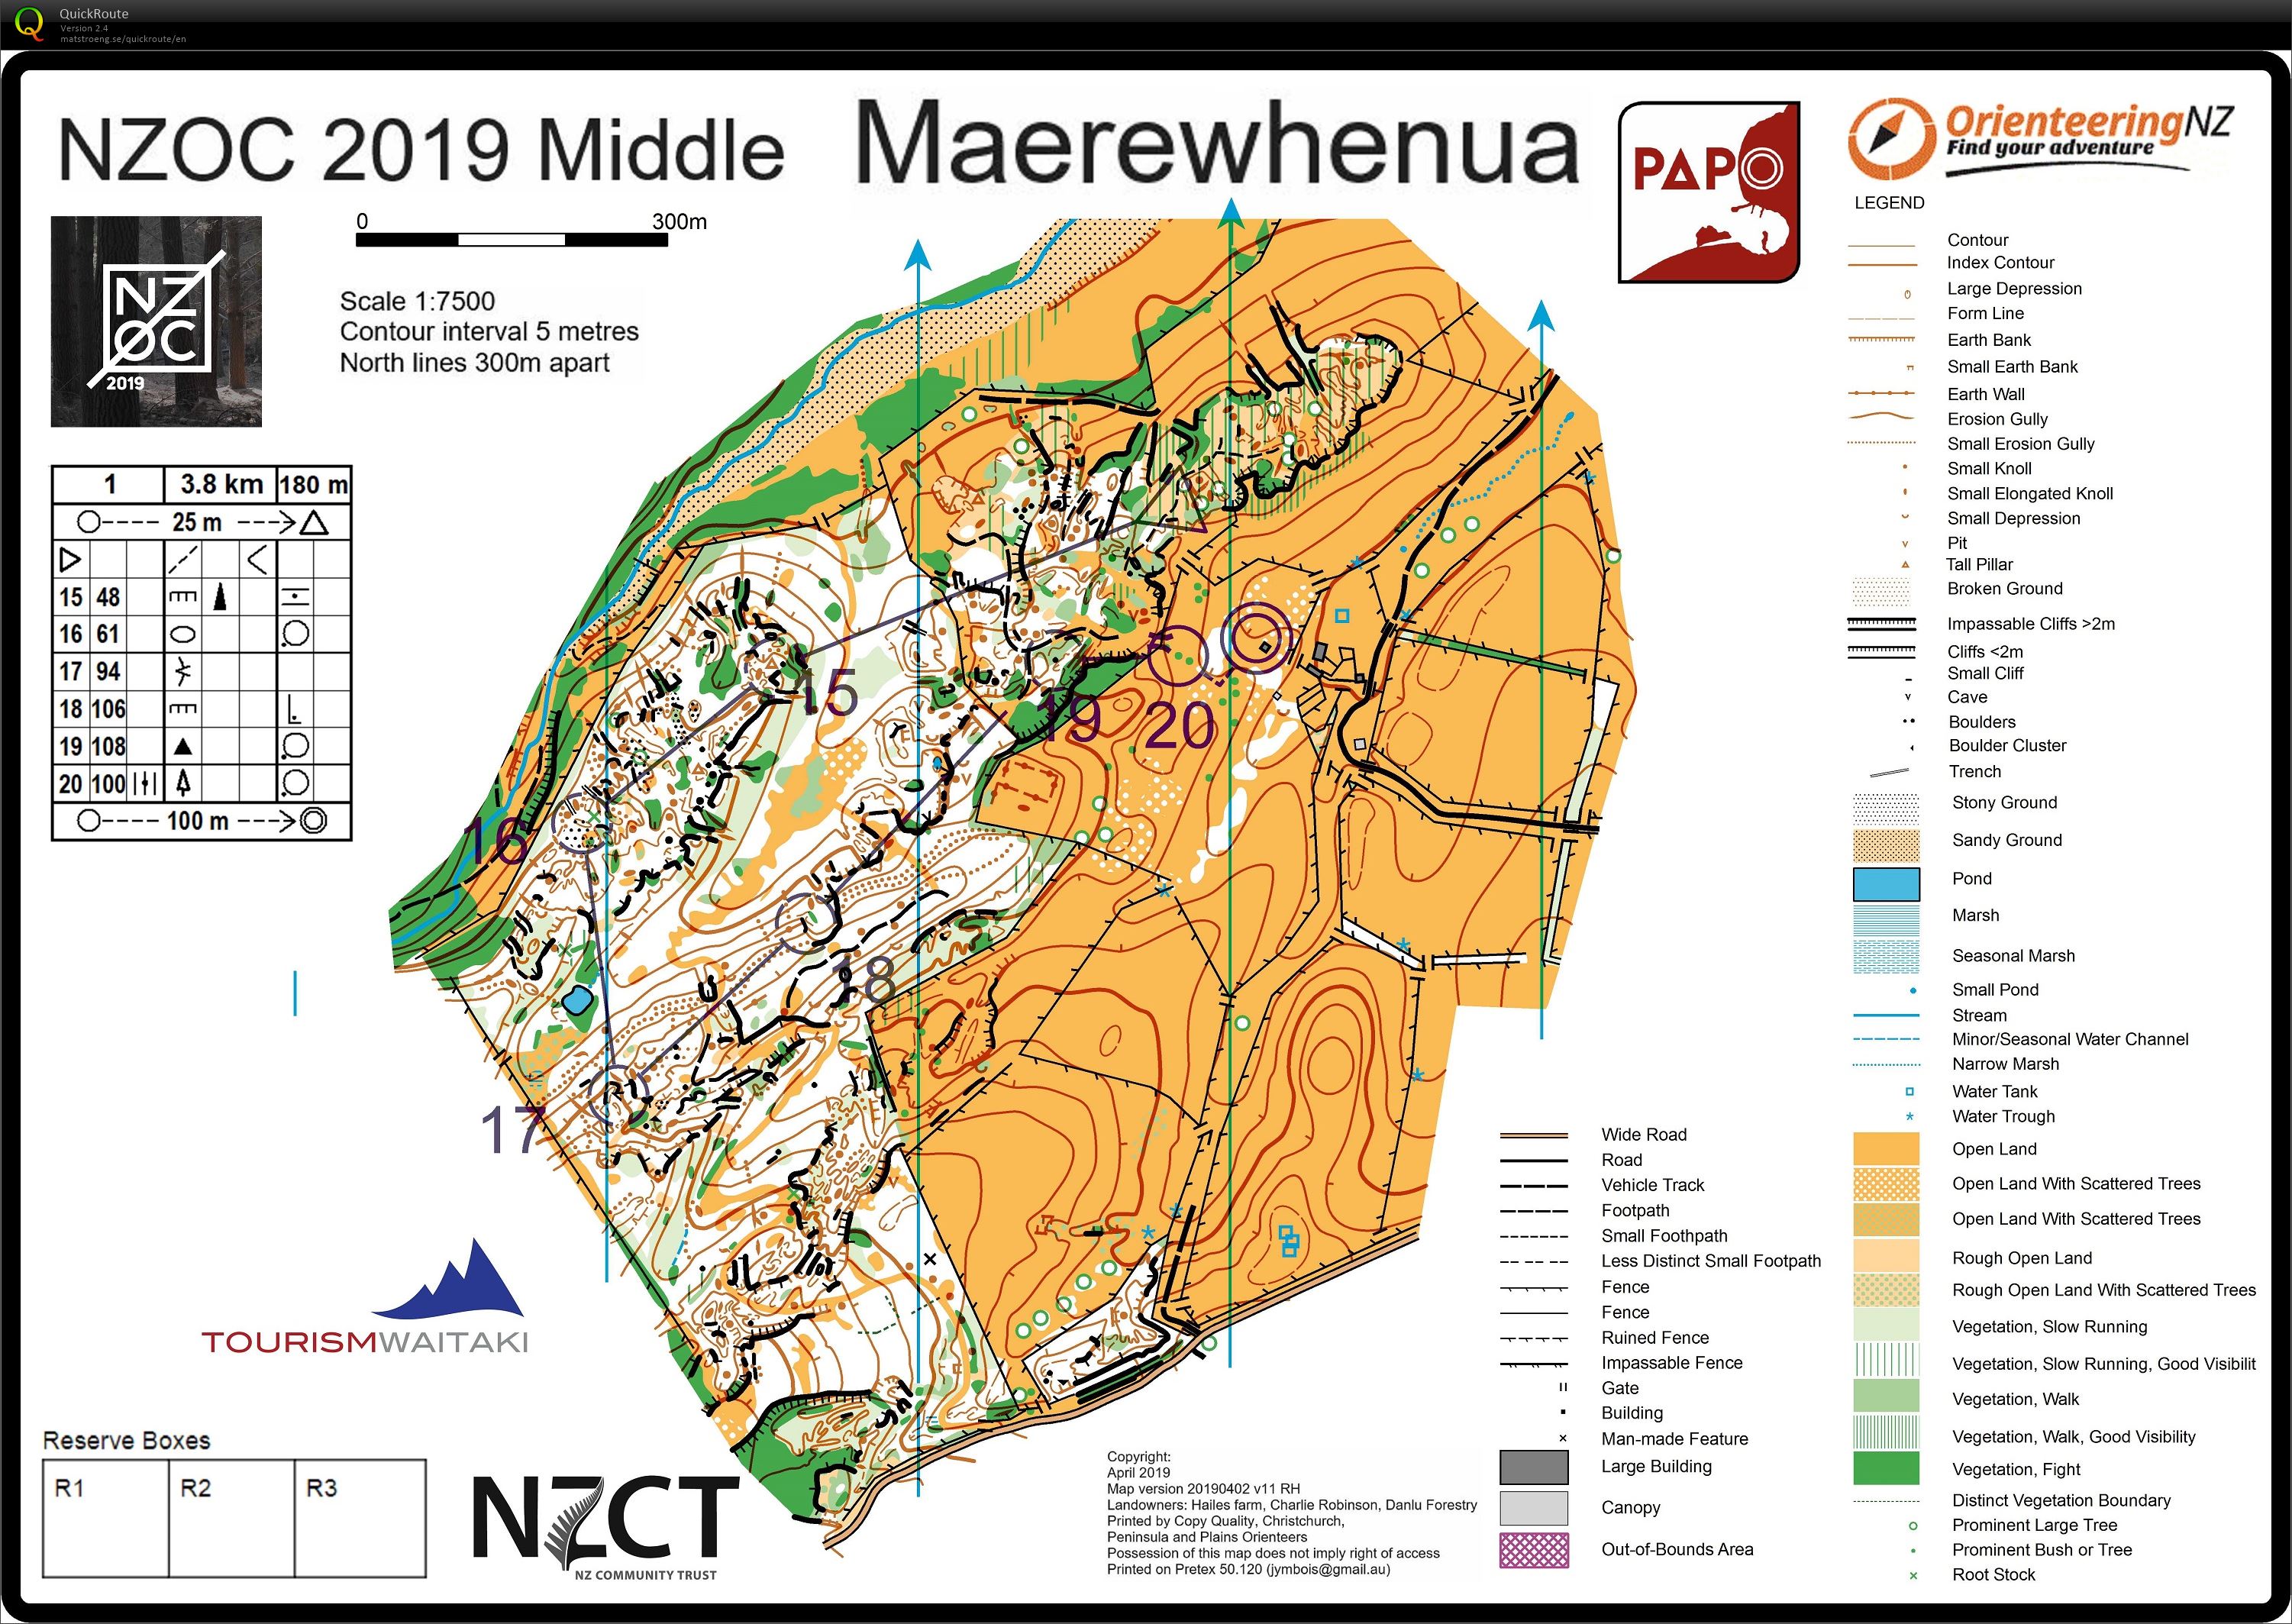 NZ Champs Middle pt 2 (2019-04-20)